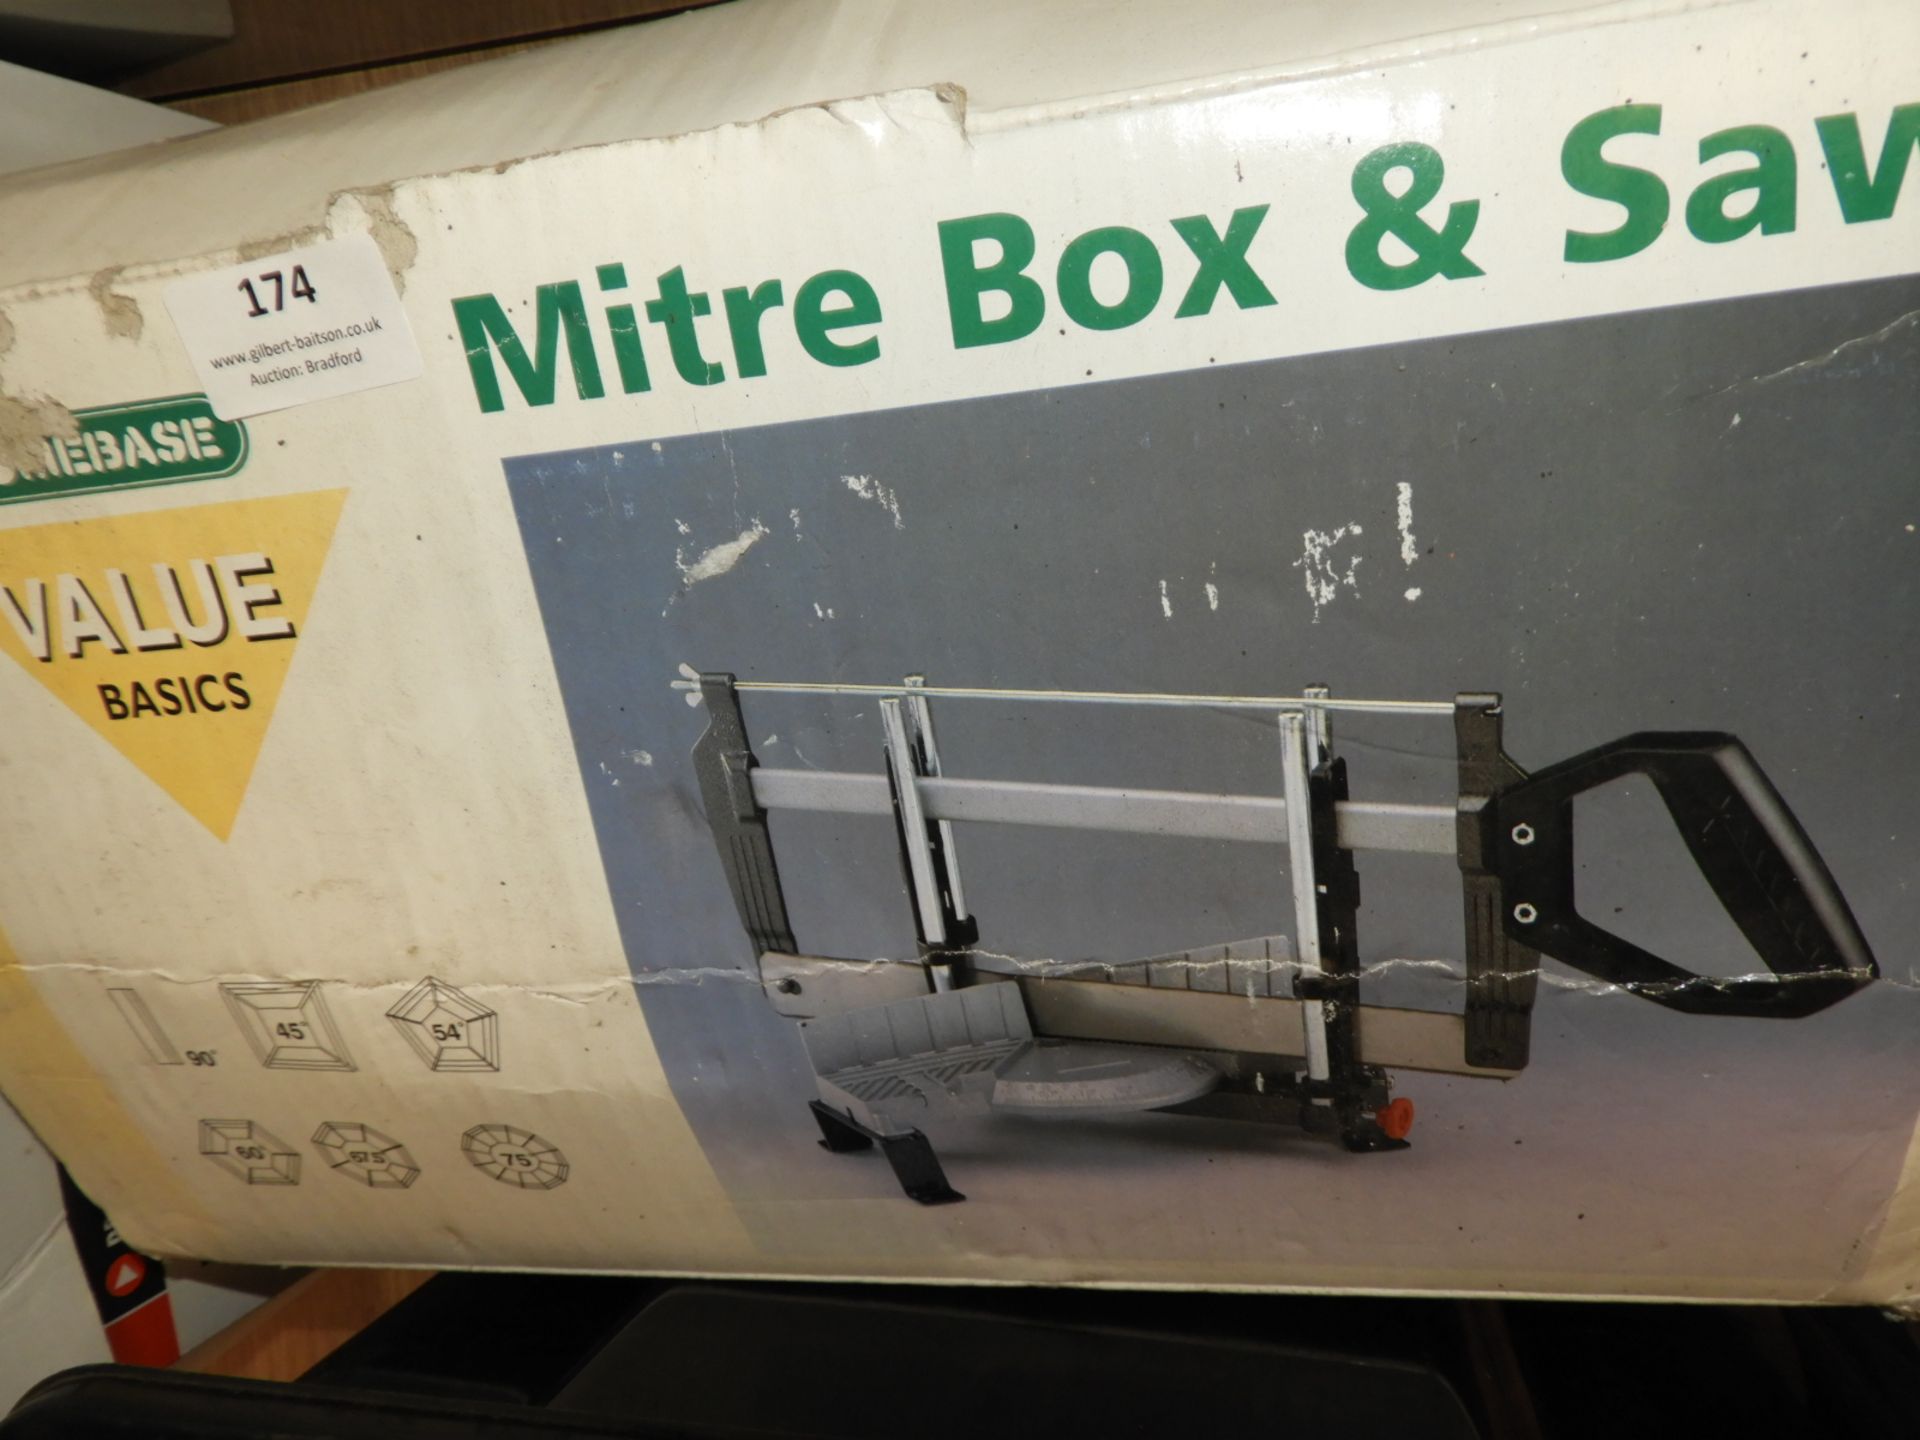 *Mitre Box and Saw